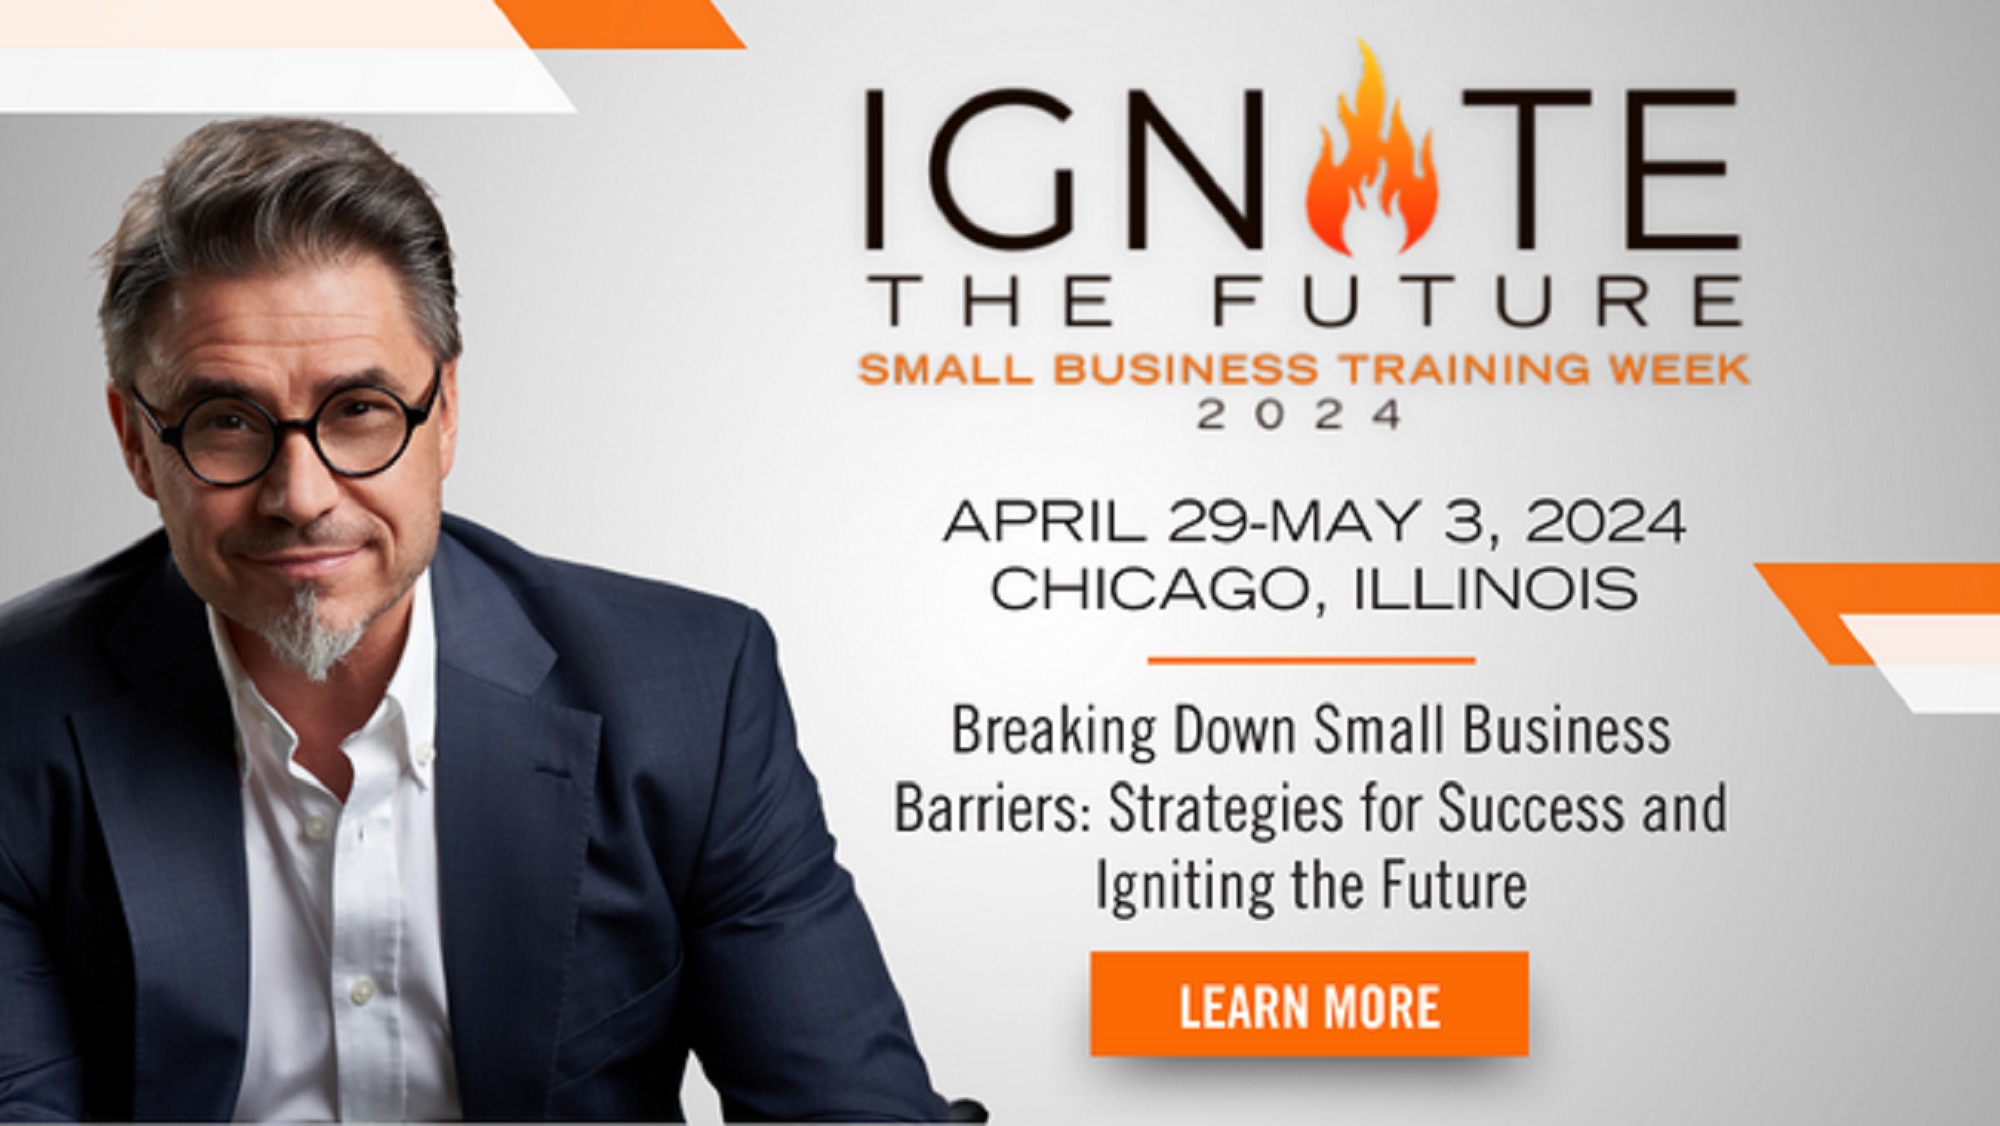 Small Business Training Week 2024